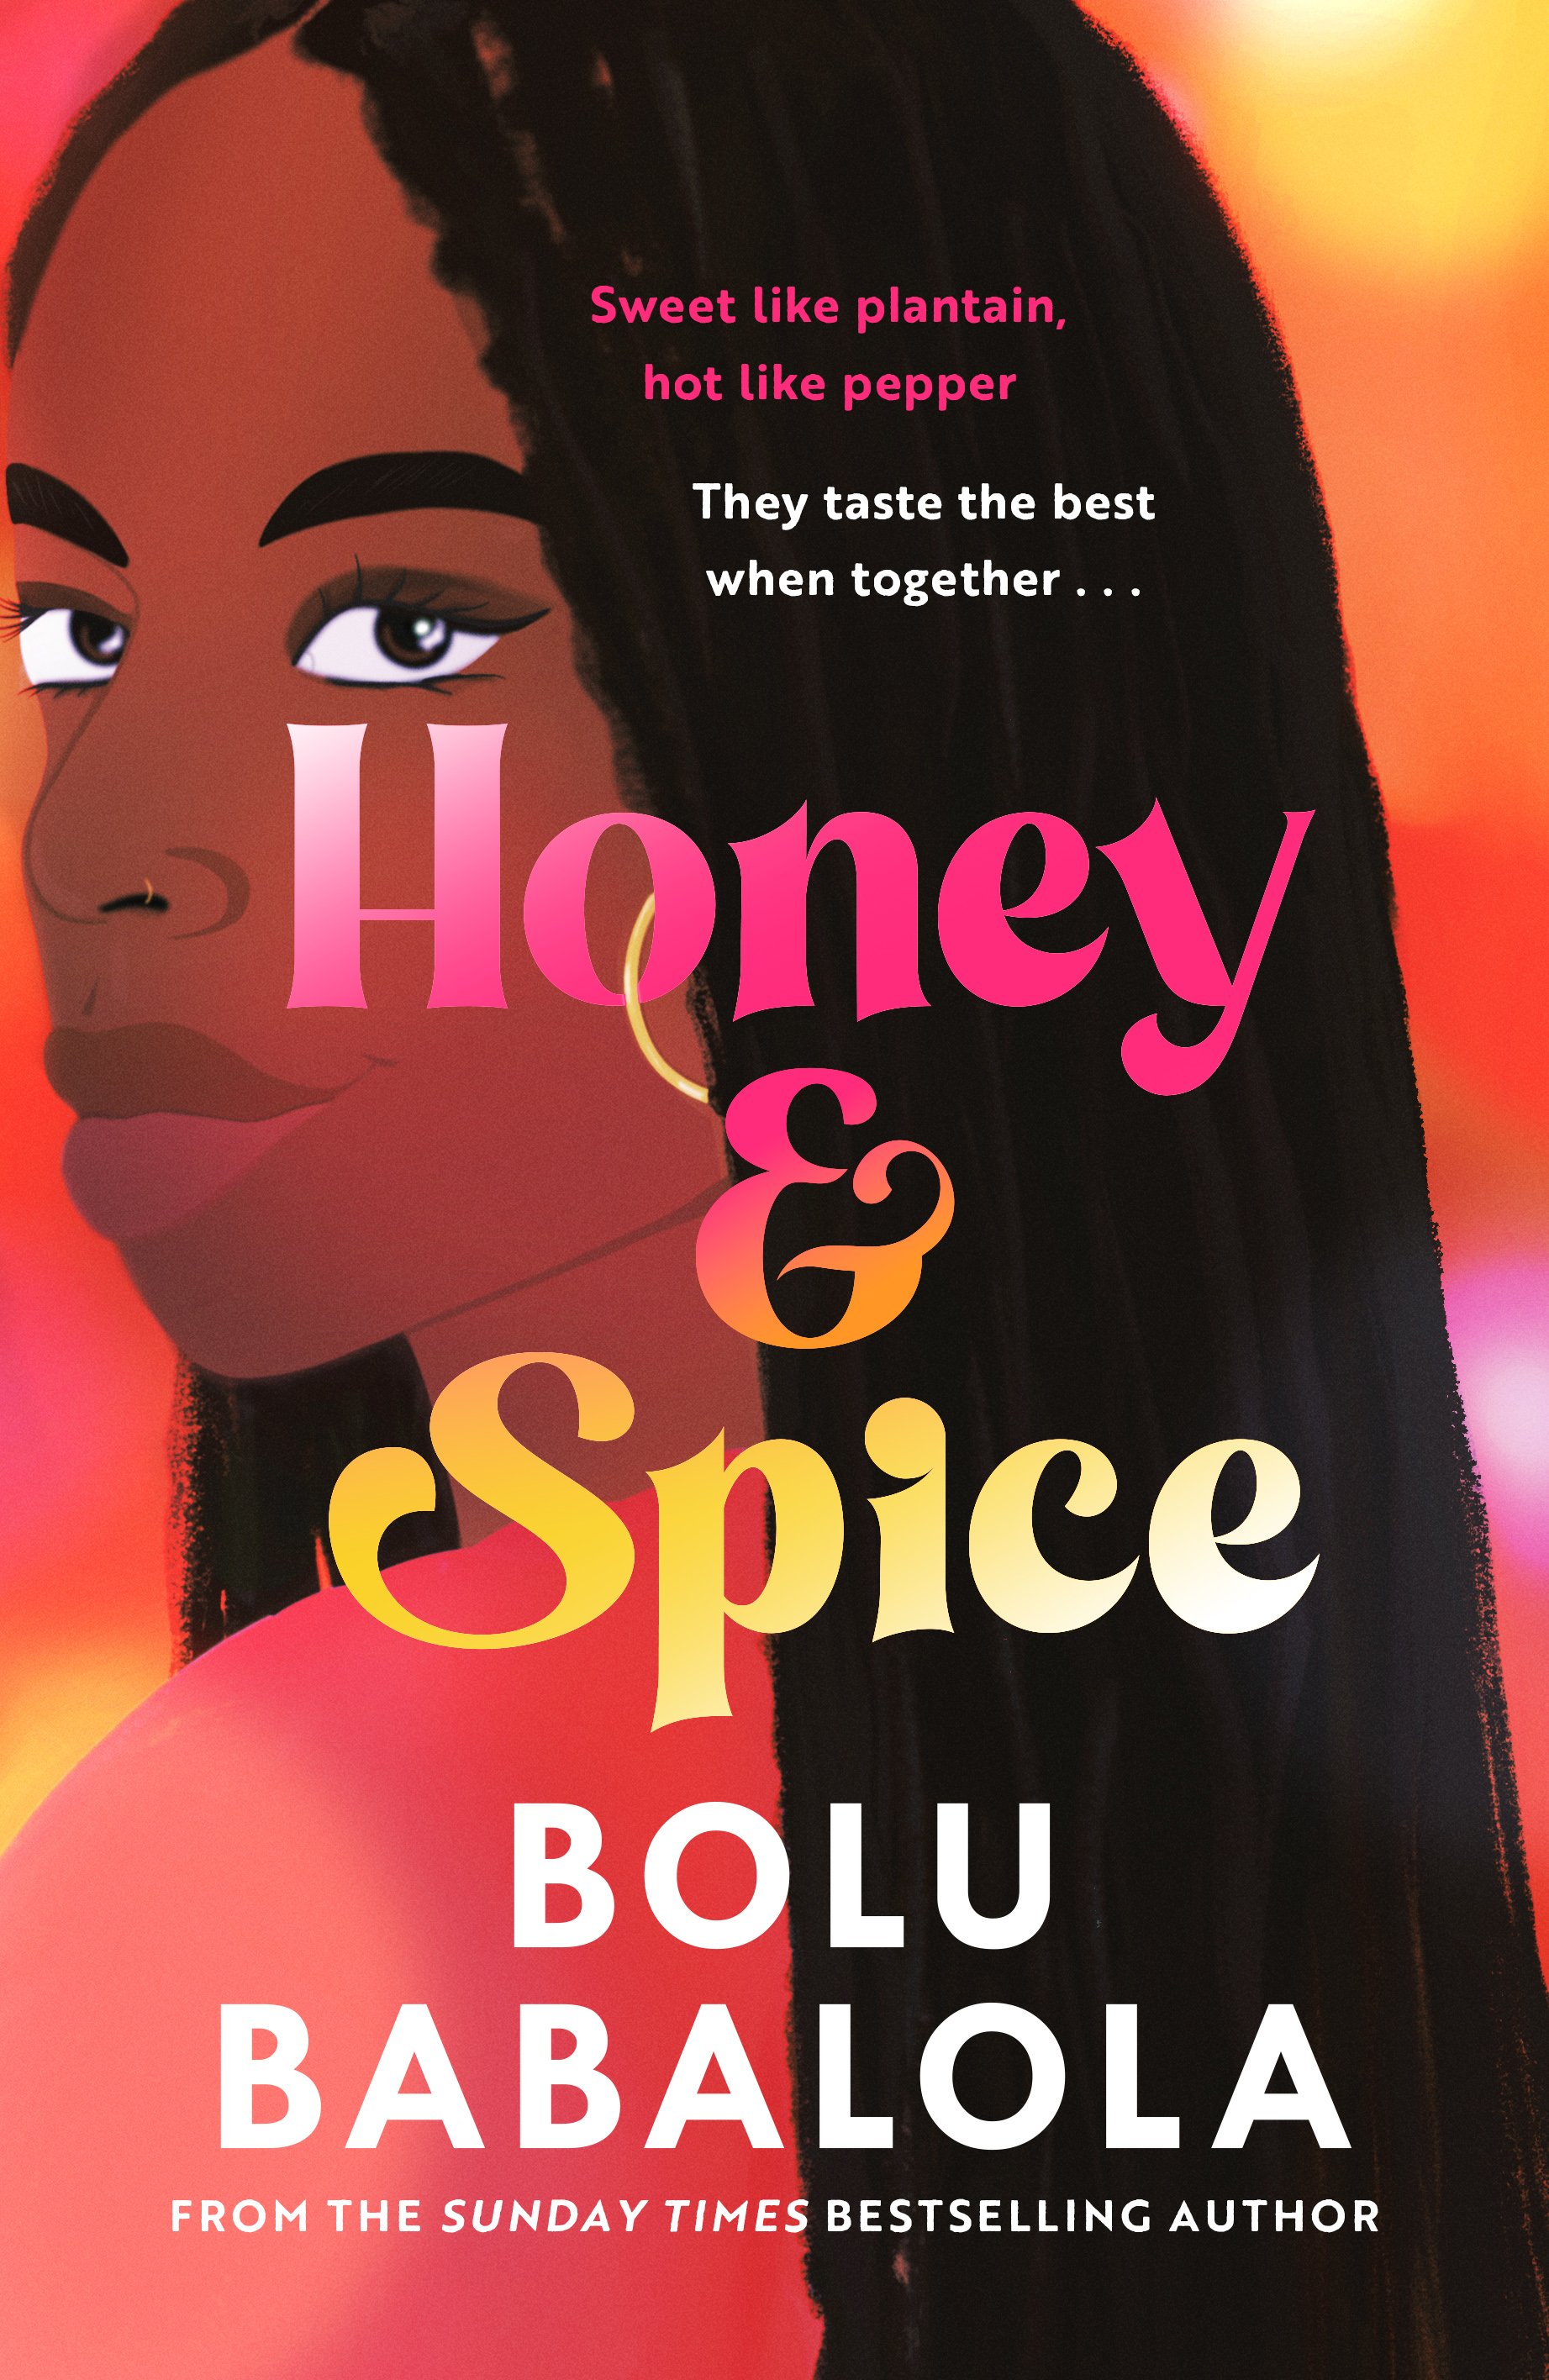 Honey and Spice HB cover FINAL.jpg